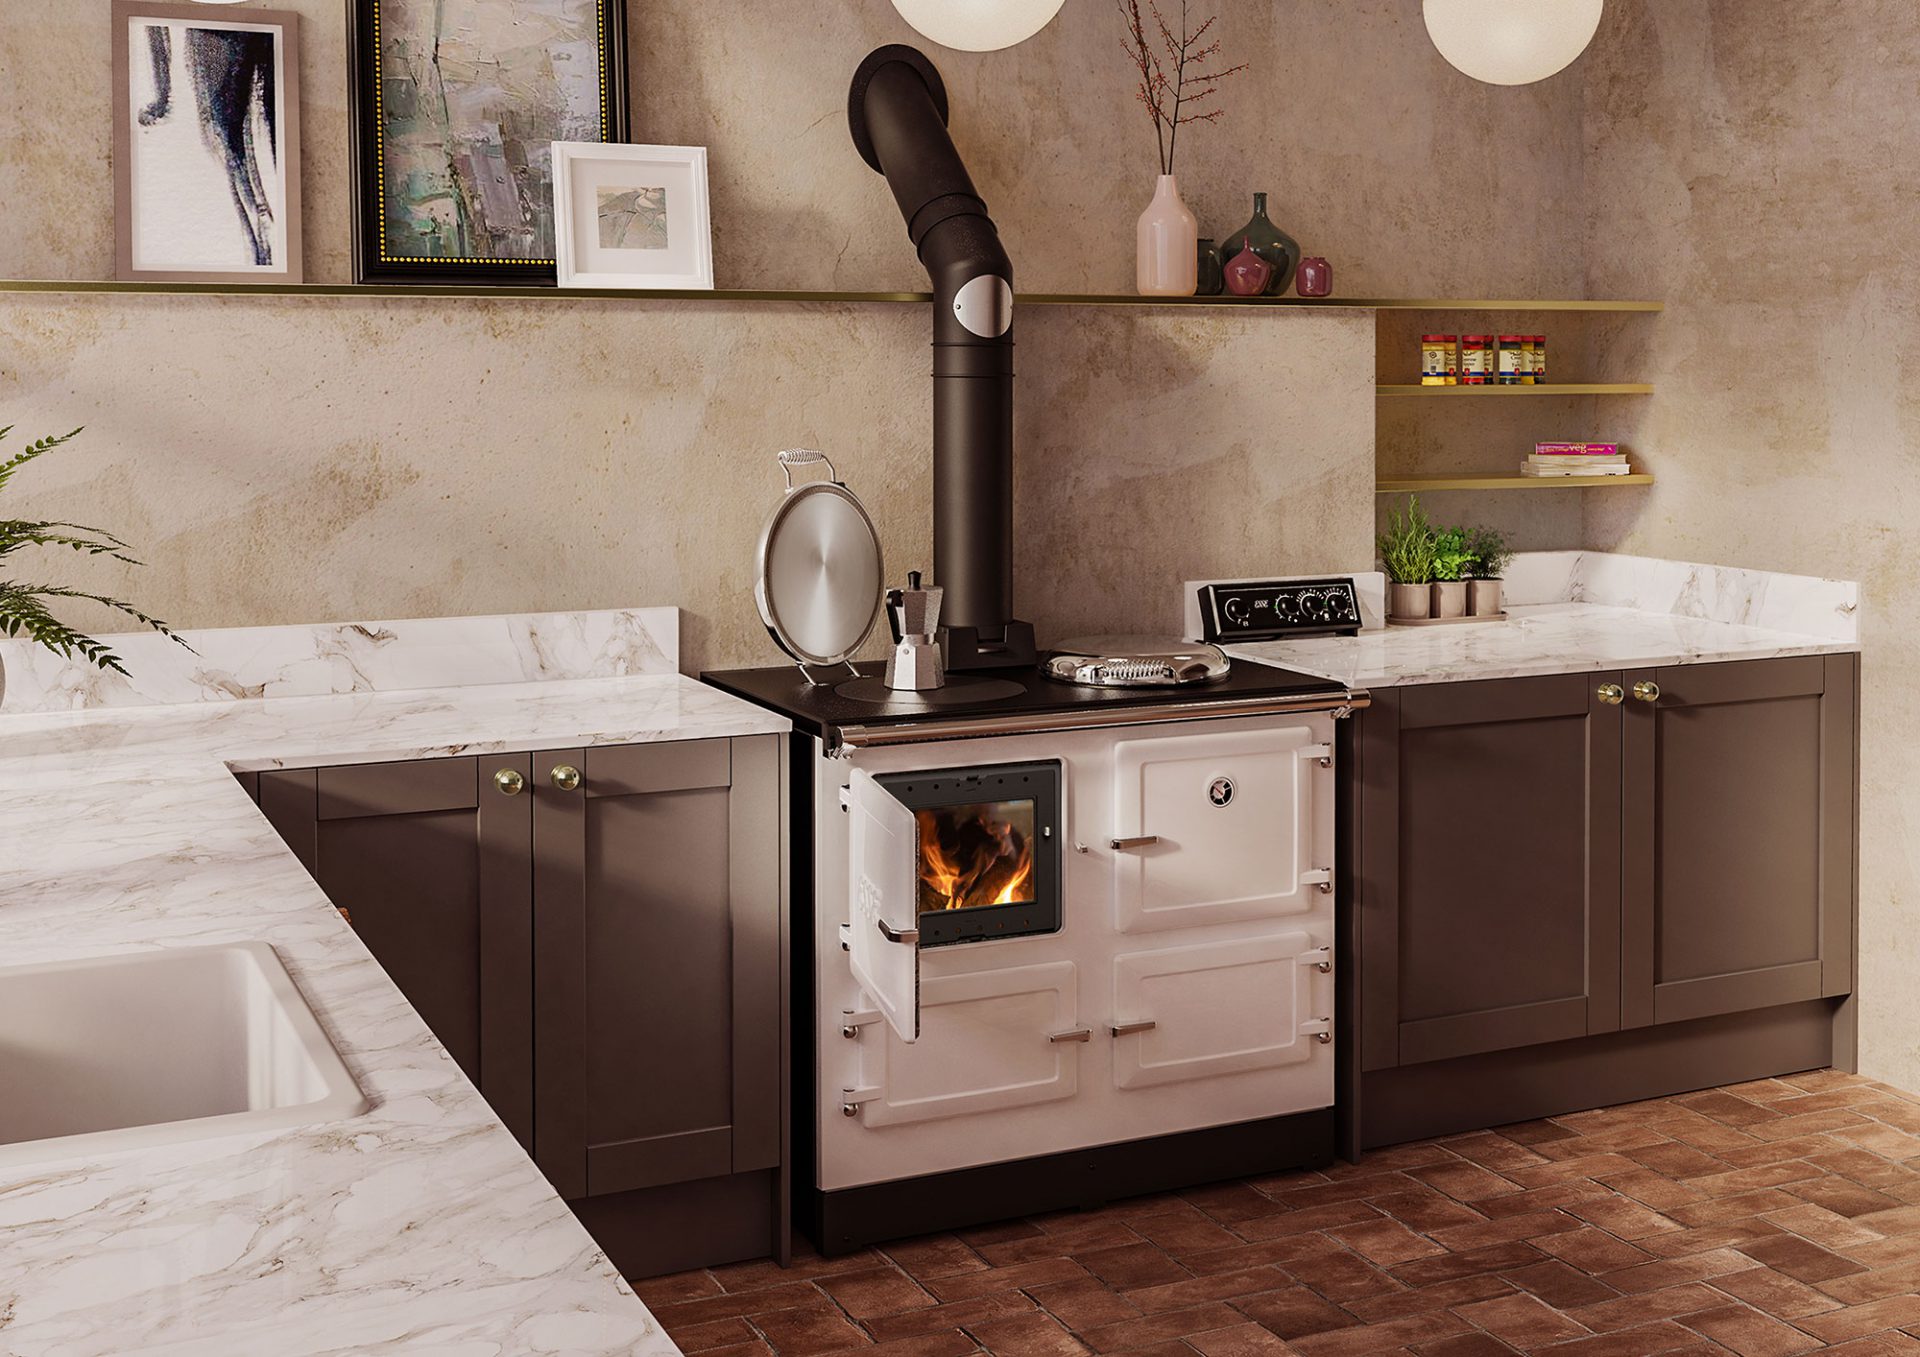 ESSE Hybrid: the modern range cooker with fire in its belly - ESSE